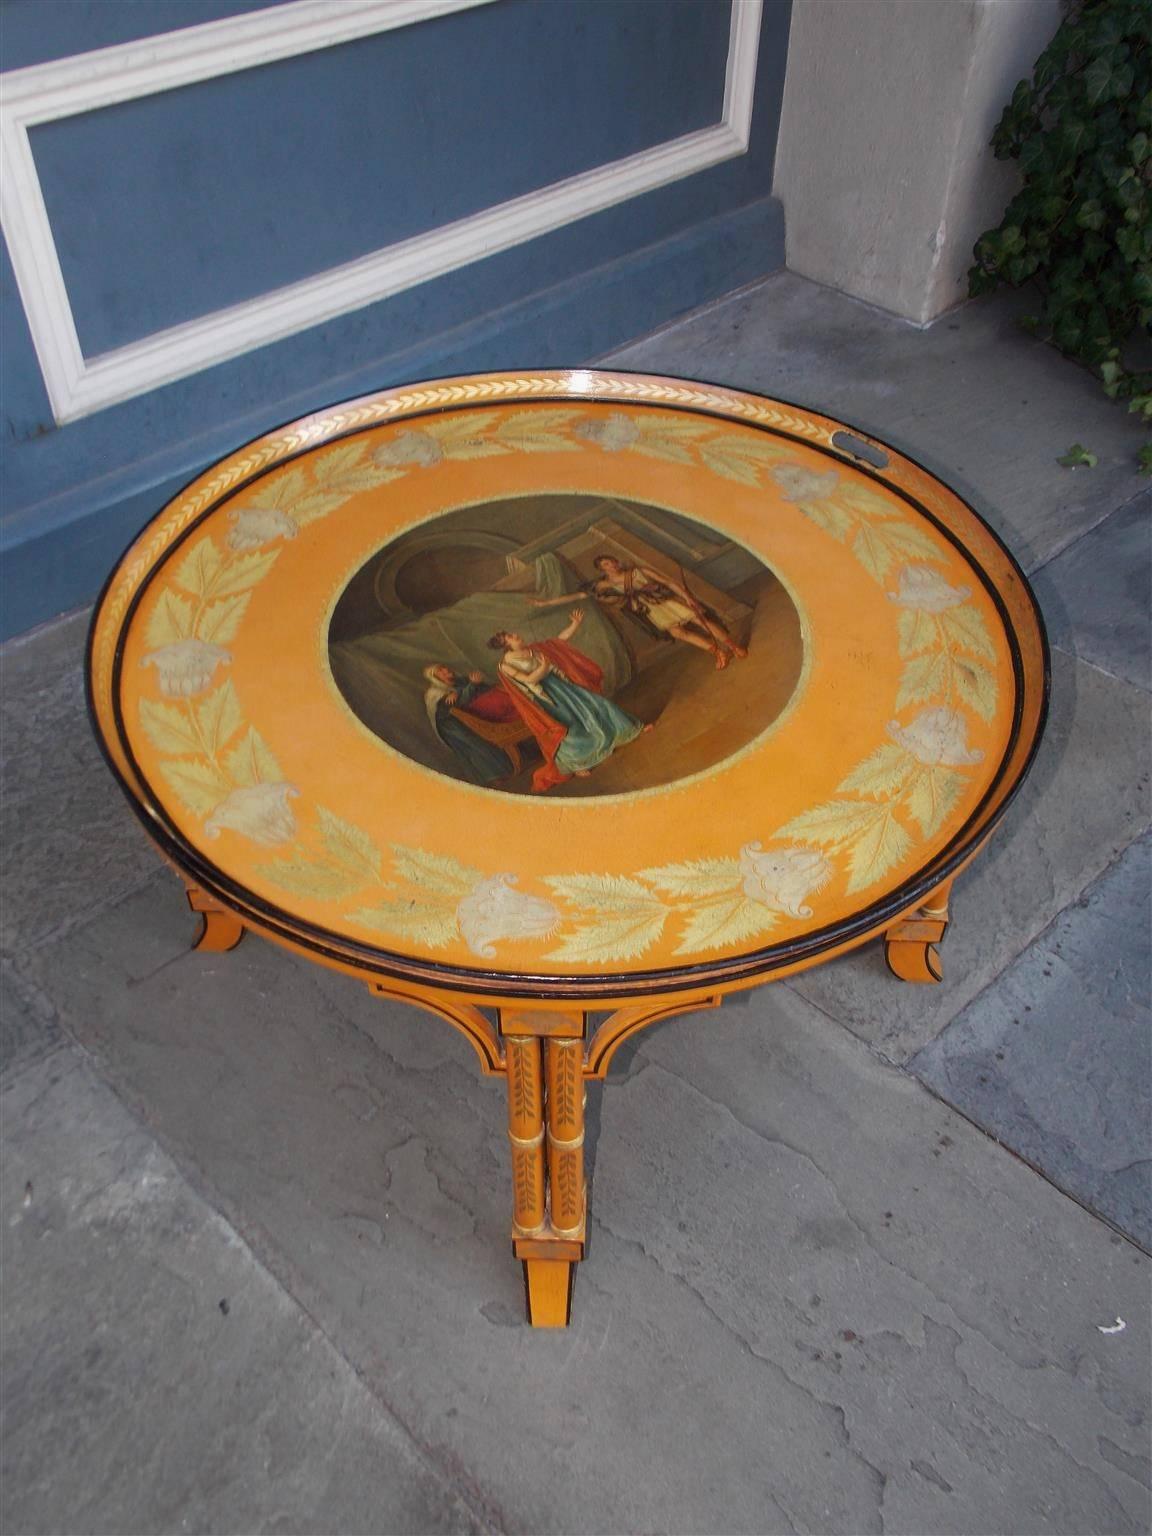 English Regency circular tole tray on stand with centered roman figures, floral ebonized borders, side handles, and resting on a painted carved faux bamboo floral stand with the original stretchers, Early 19th Century.